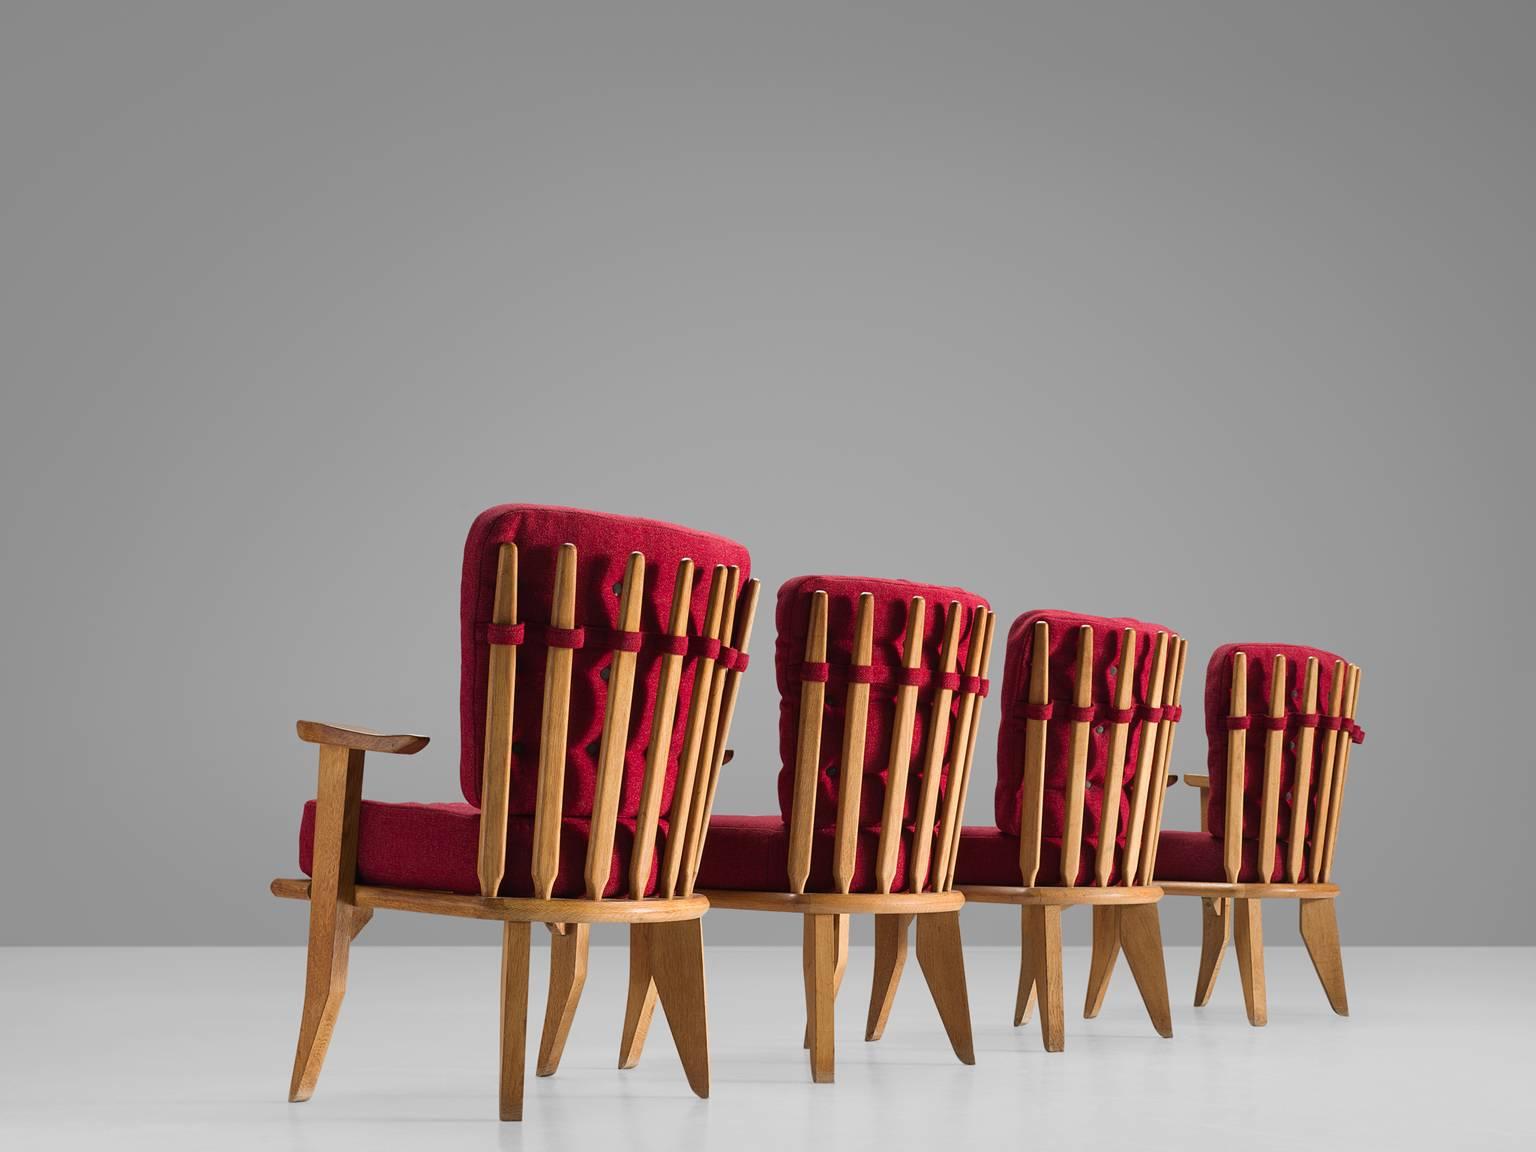 Jacques Chambron and Robert Guillerme, easy chairs, red fabric, oak, France, 1950s.

These sculptural easy chairs are designed by the designer duo Guillerme and Chambron. The couple is known for their high quality solid oak furniture. These robust